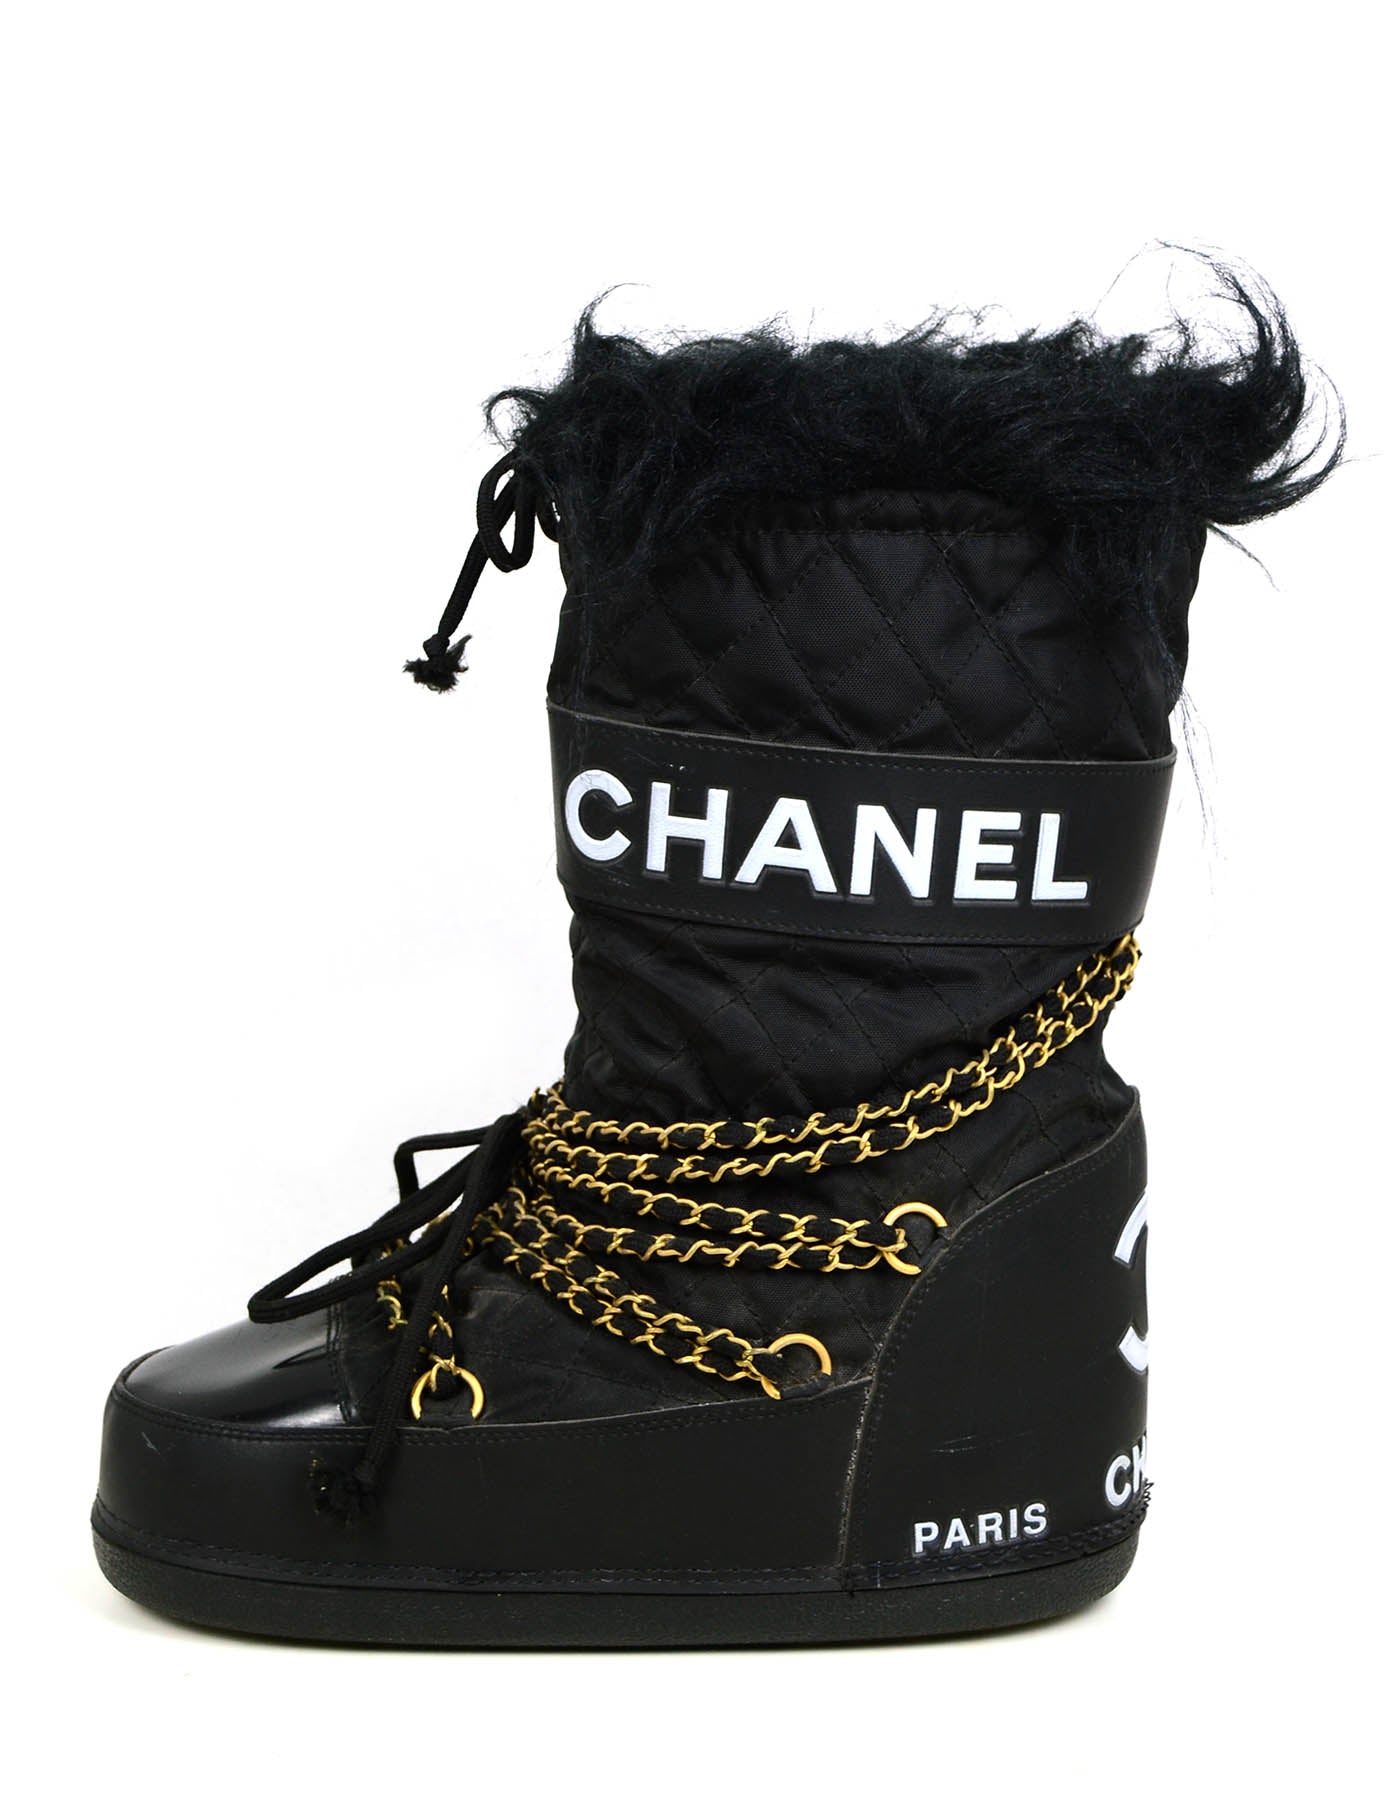 CHANEL, Shoes, Chanel Moonboots Snow Boots Vintage 9s